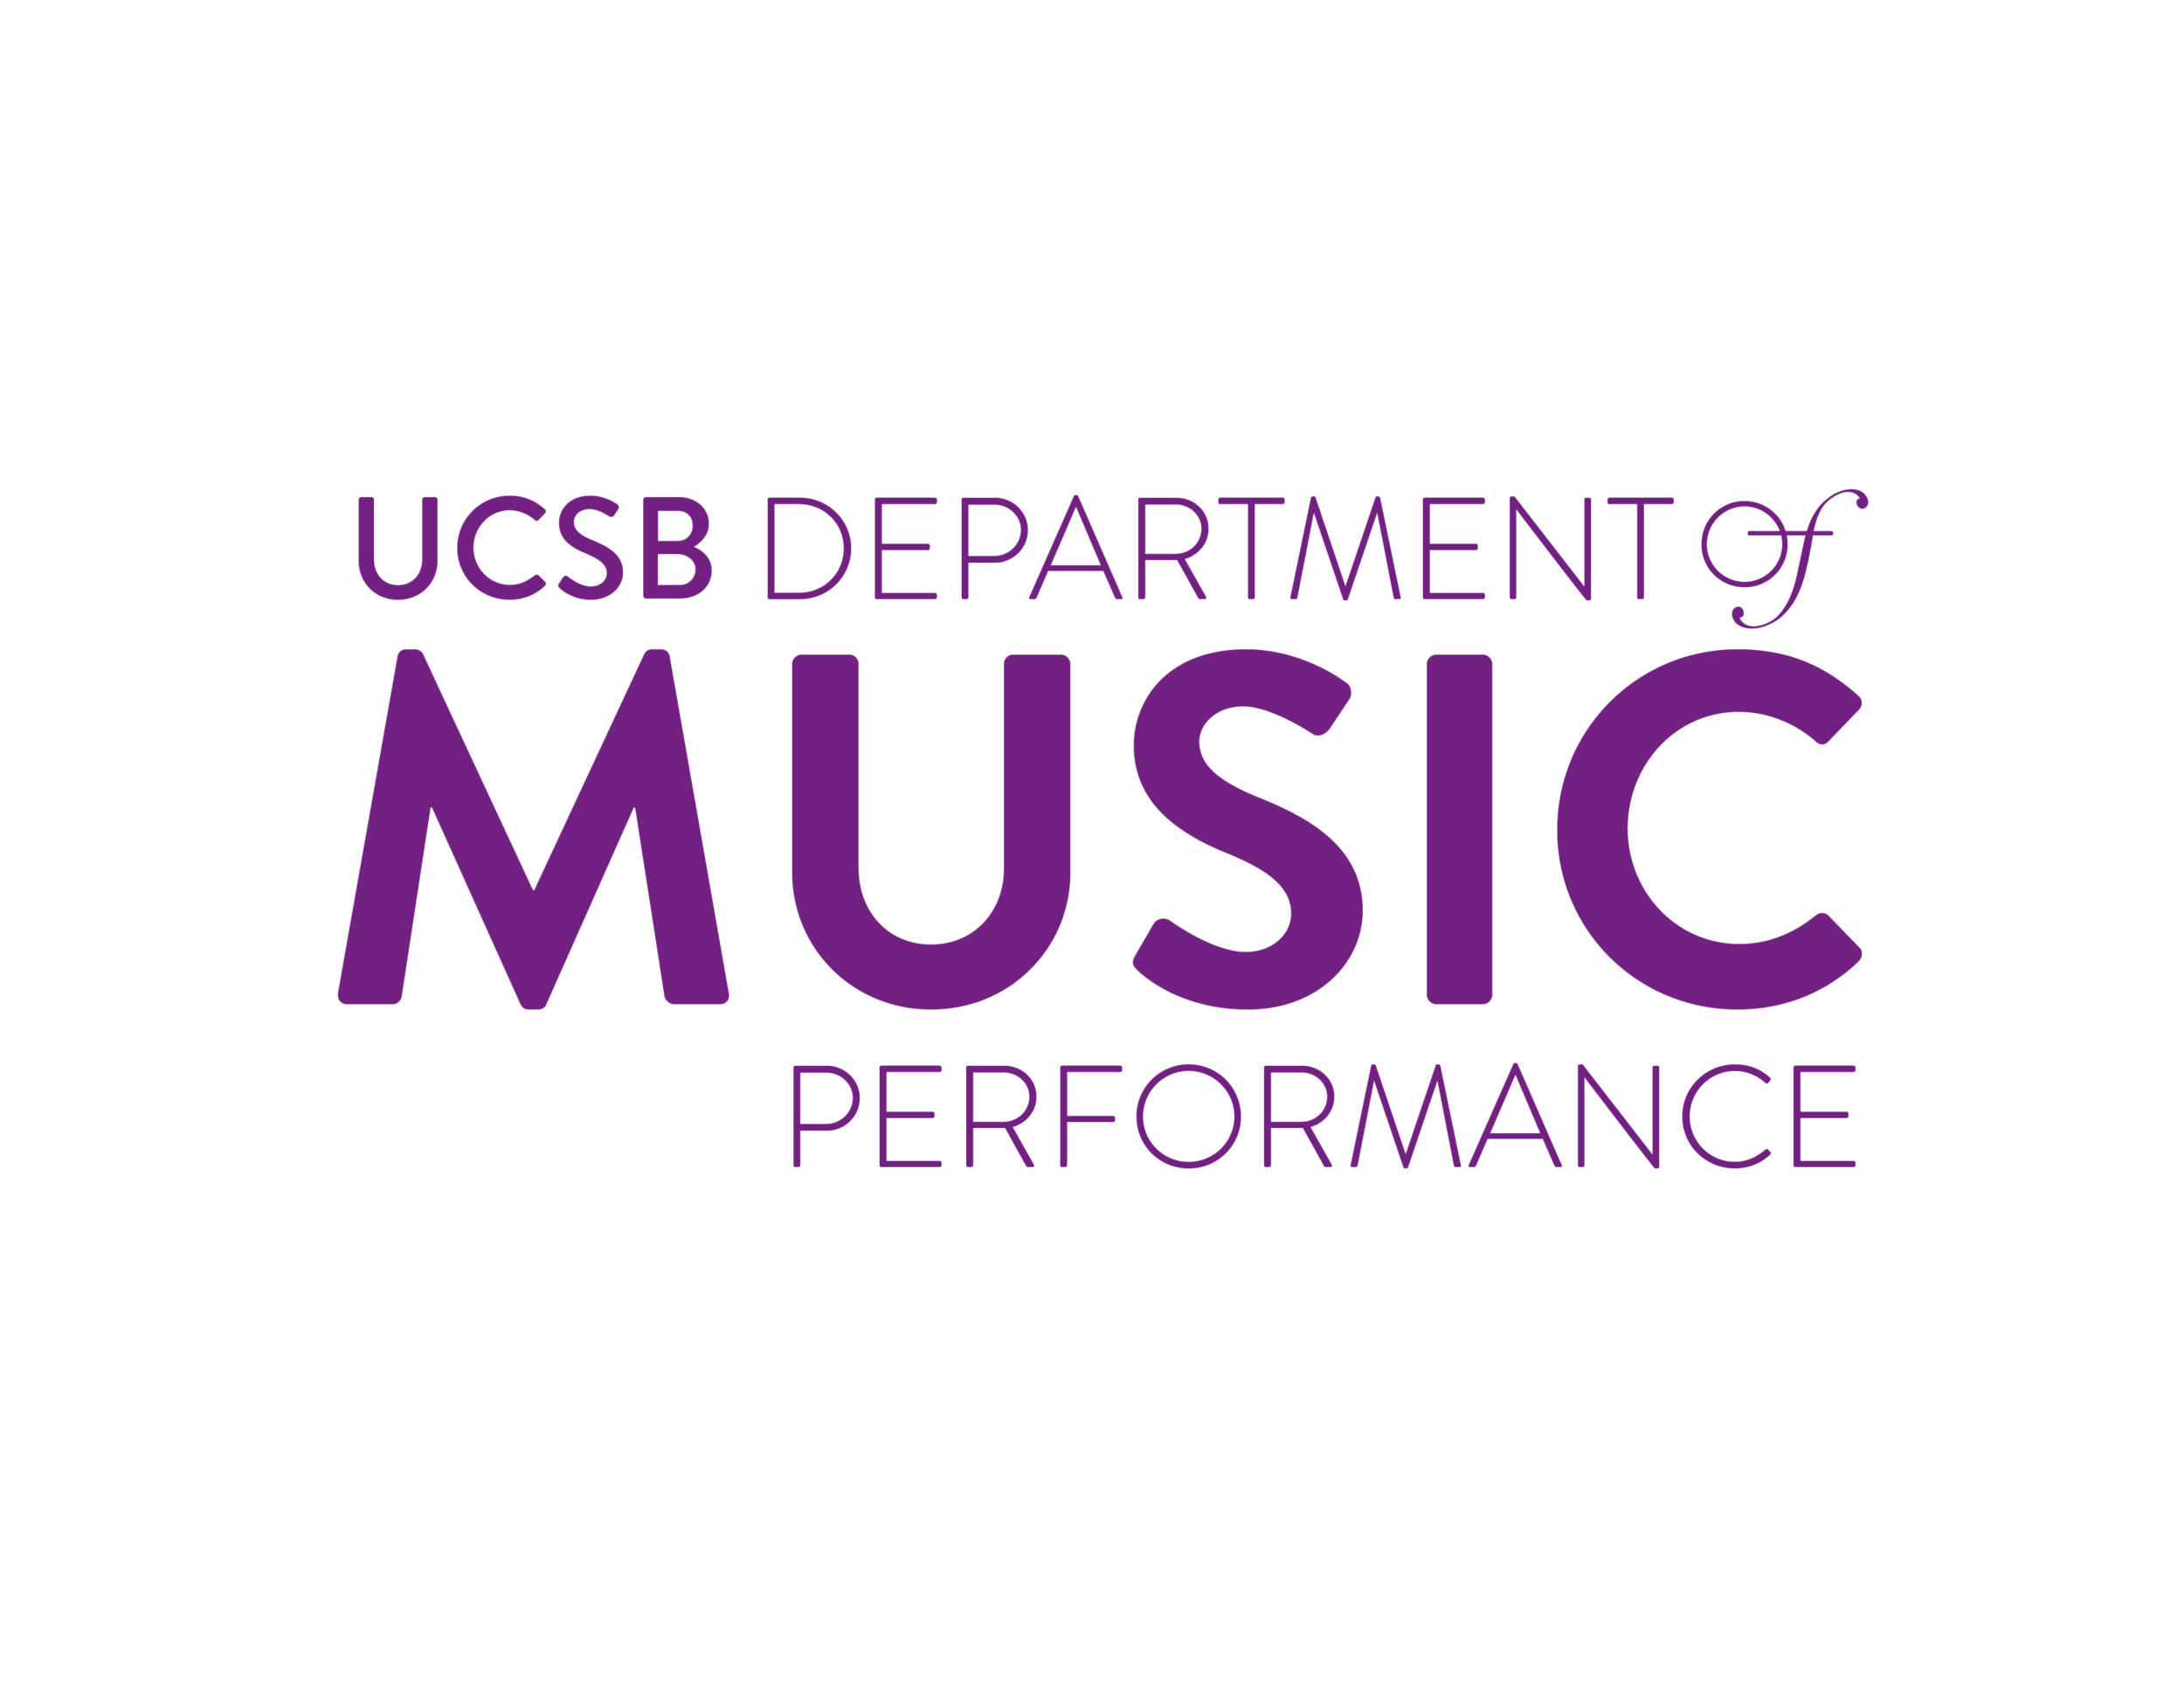 ucsb guidelines new logo and font use FINAL-11.png